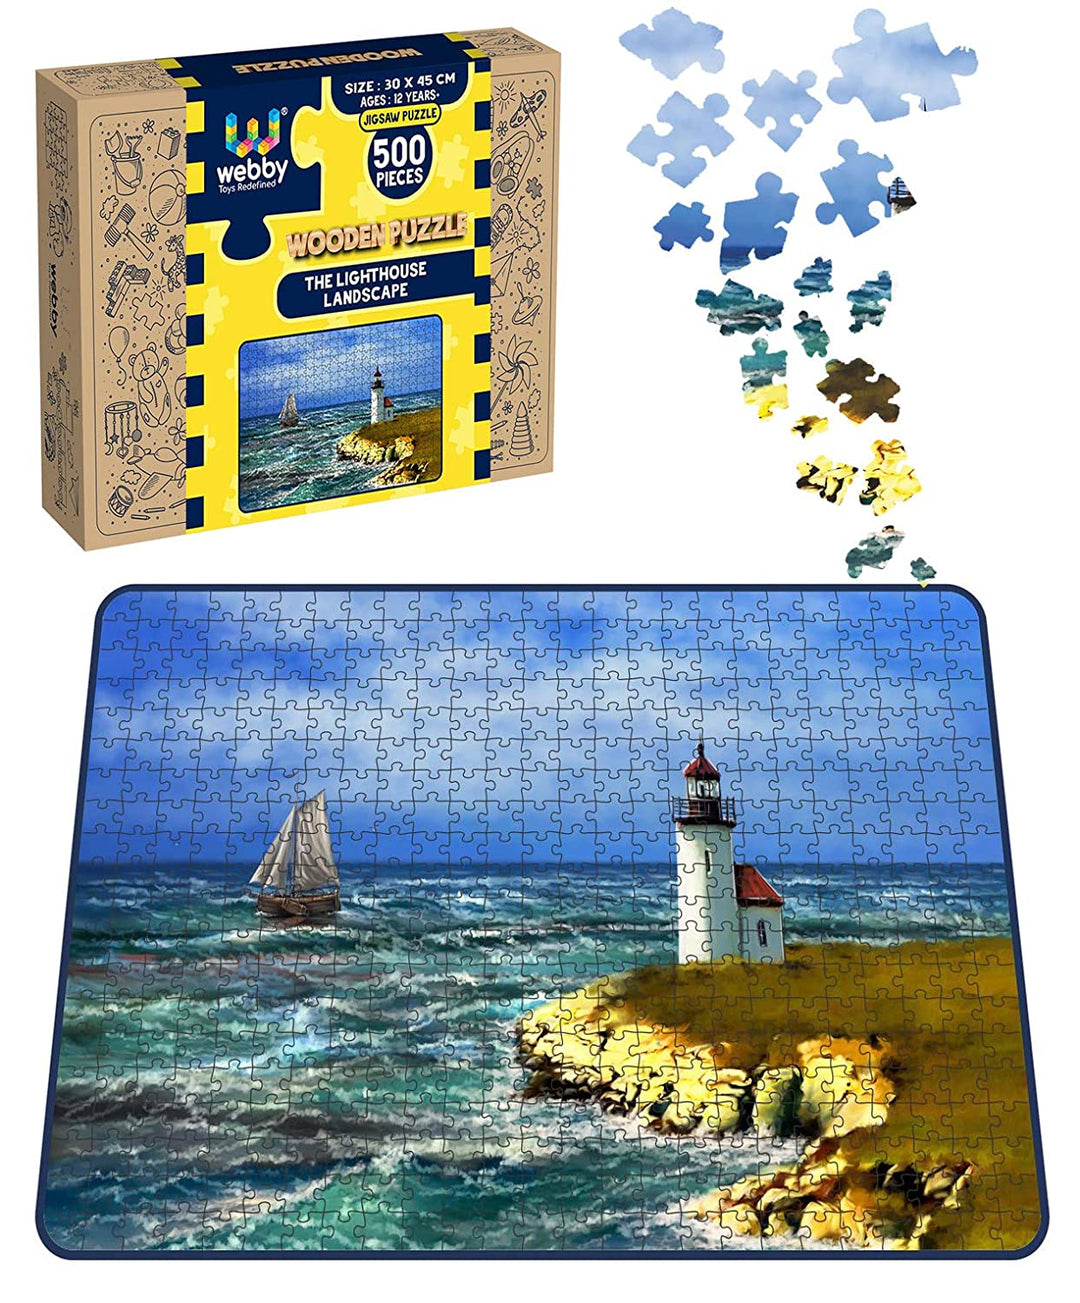 Webby The Lighthouse Landscape Wooden Jigsaw Puzzle, 500 pieces